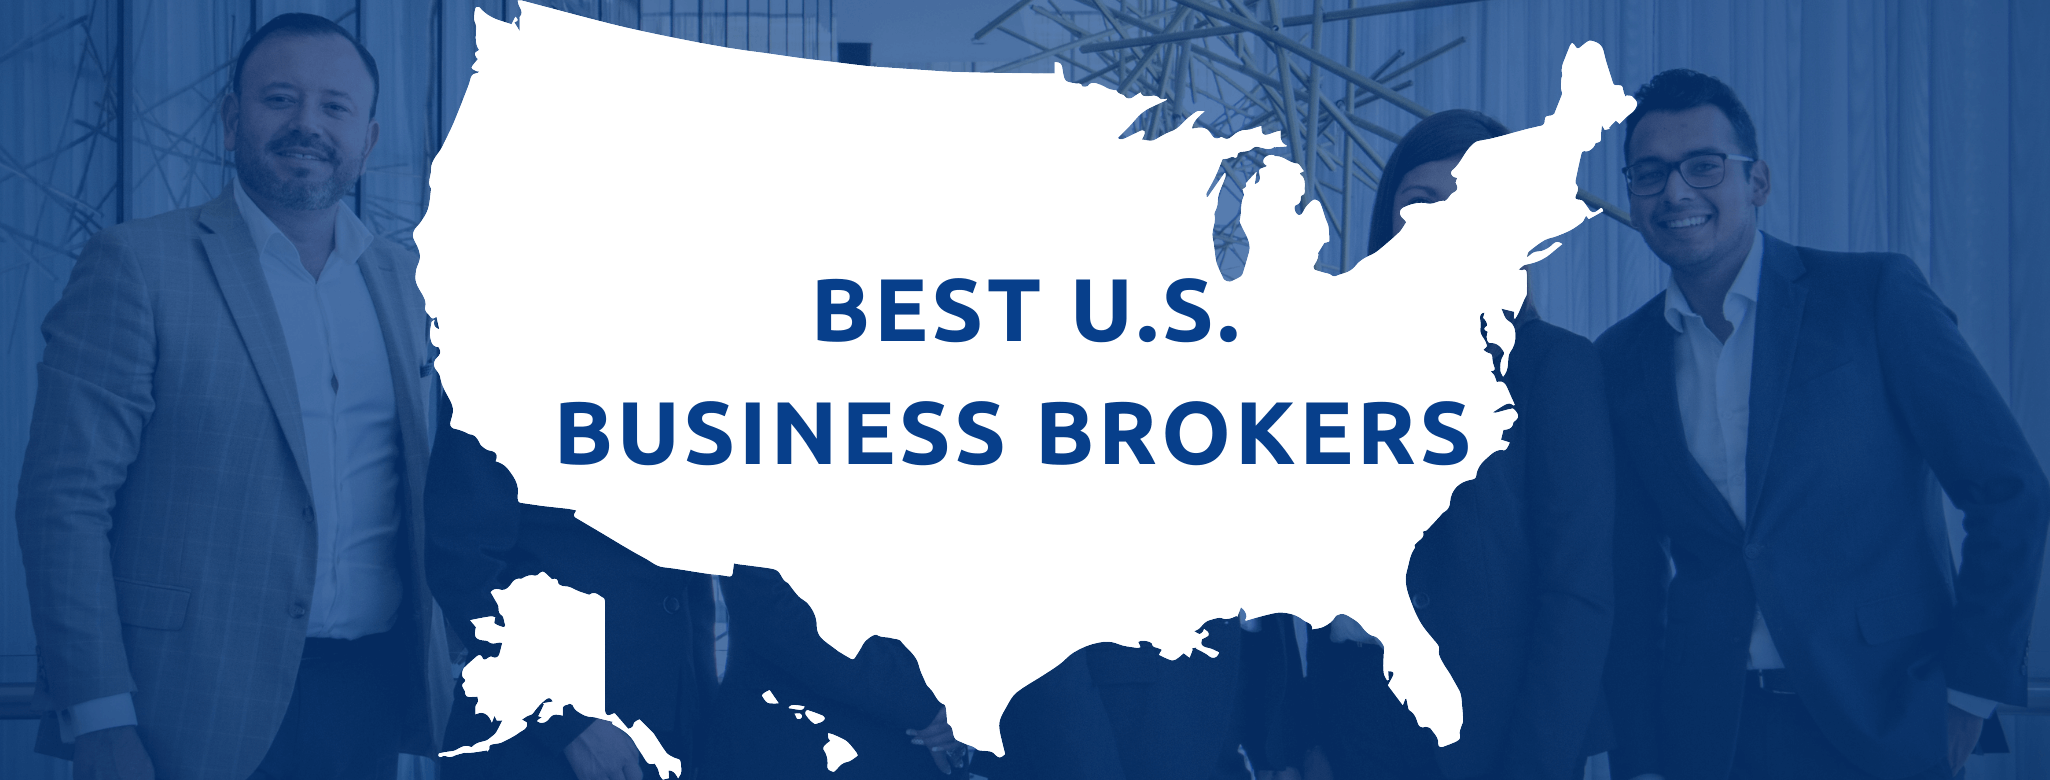 Best United States Business Brokers.